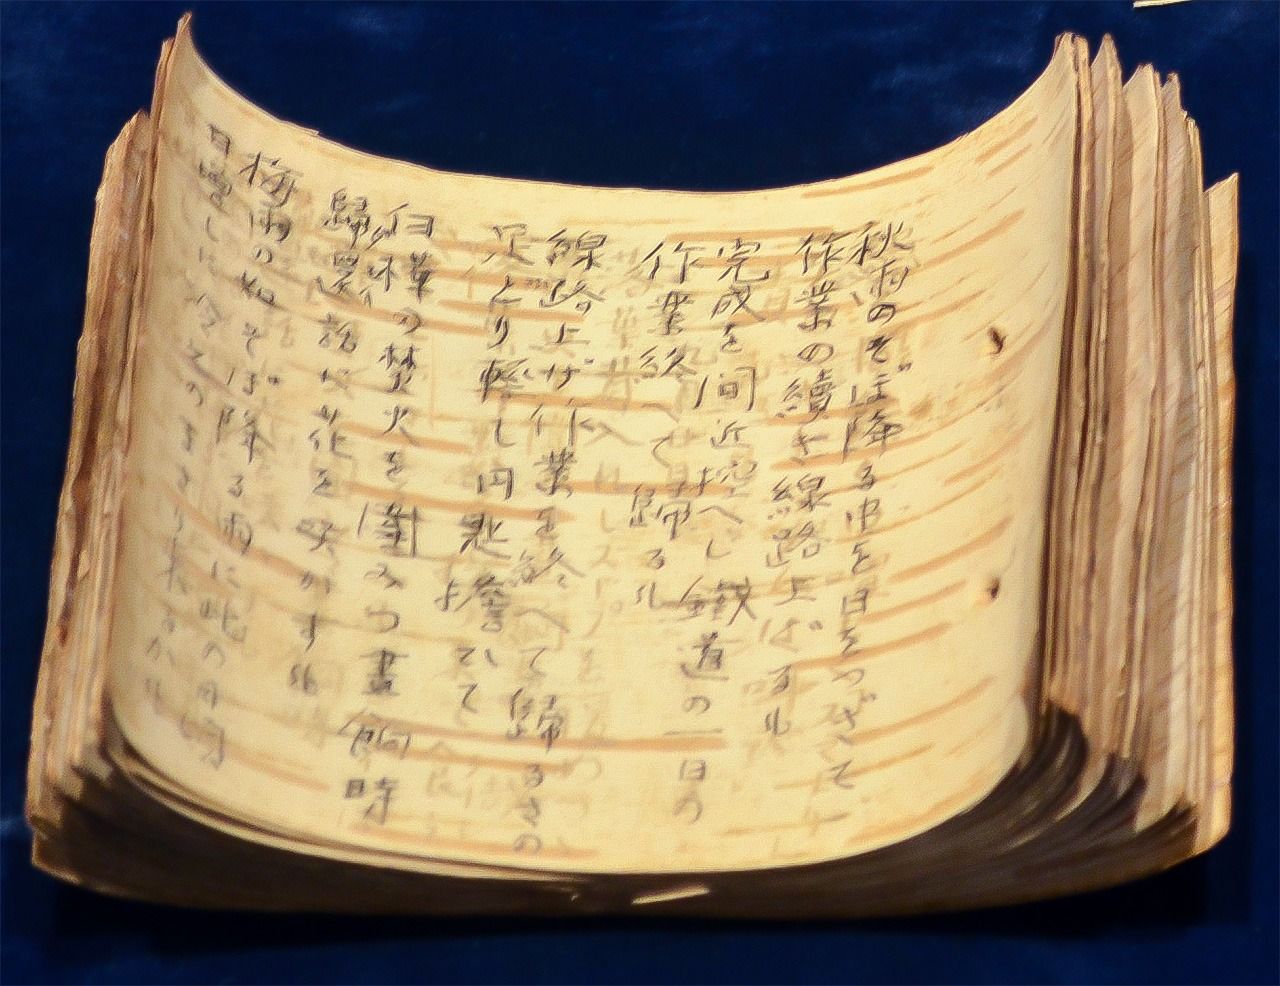 The Shirakaba Nisshi, inscribed in UNESCO’s Memory of the World, was one of the items on show in the joint exhibition. The journal contains around 200 poems written by Japanese internees in Siberian camps. The prisoners used the bark of white birch trees instead of paper. (Courtesy of the Maizuru Repatriation Memorial Museum.)